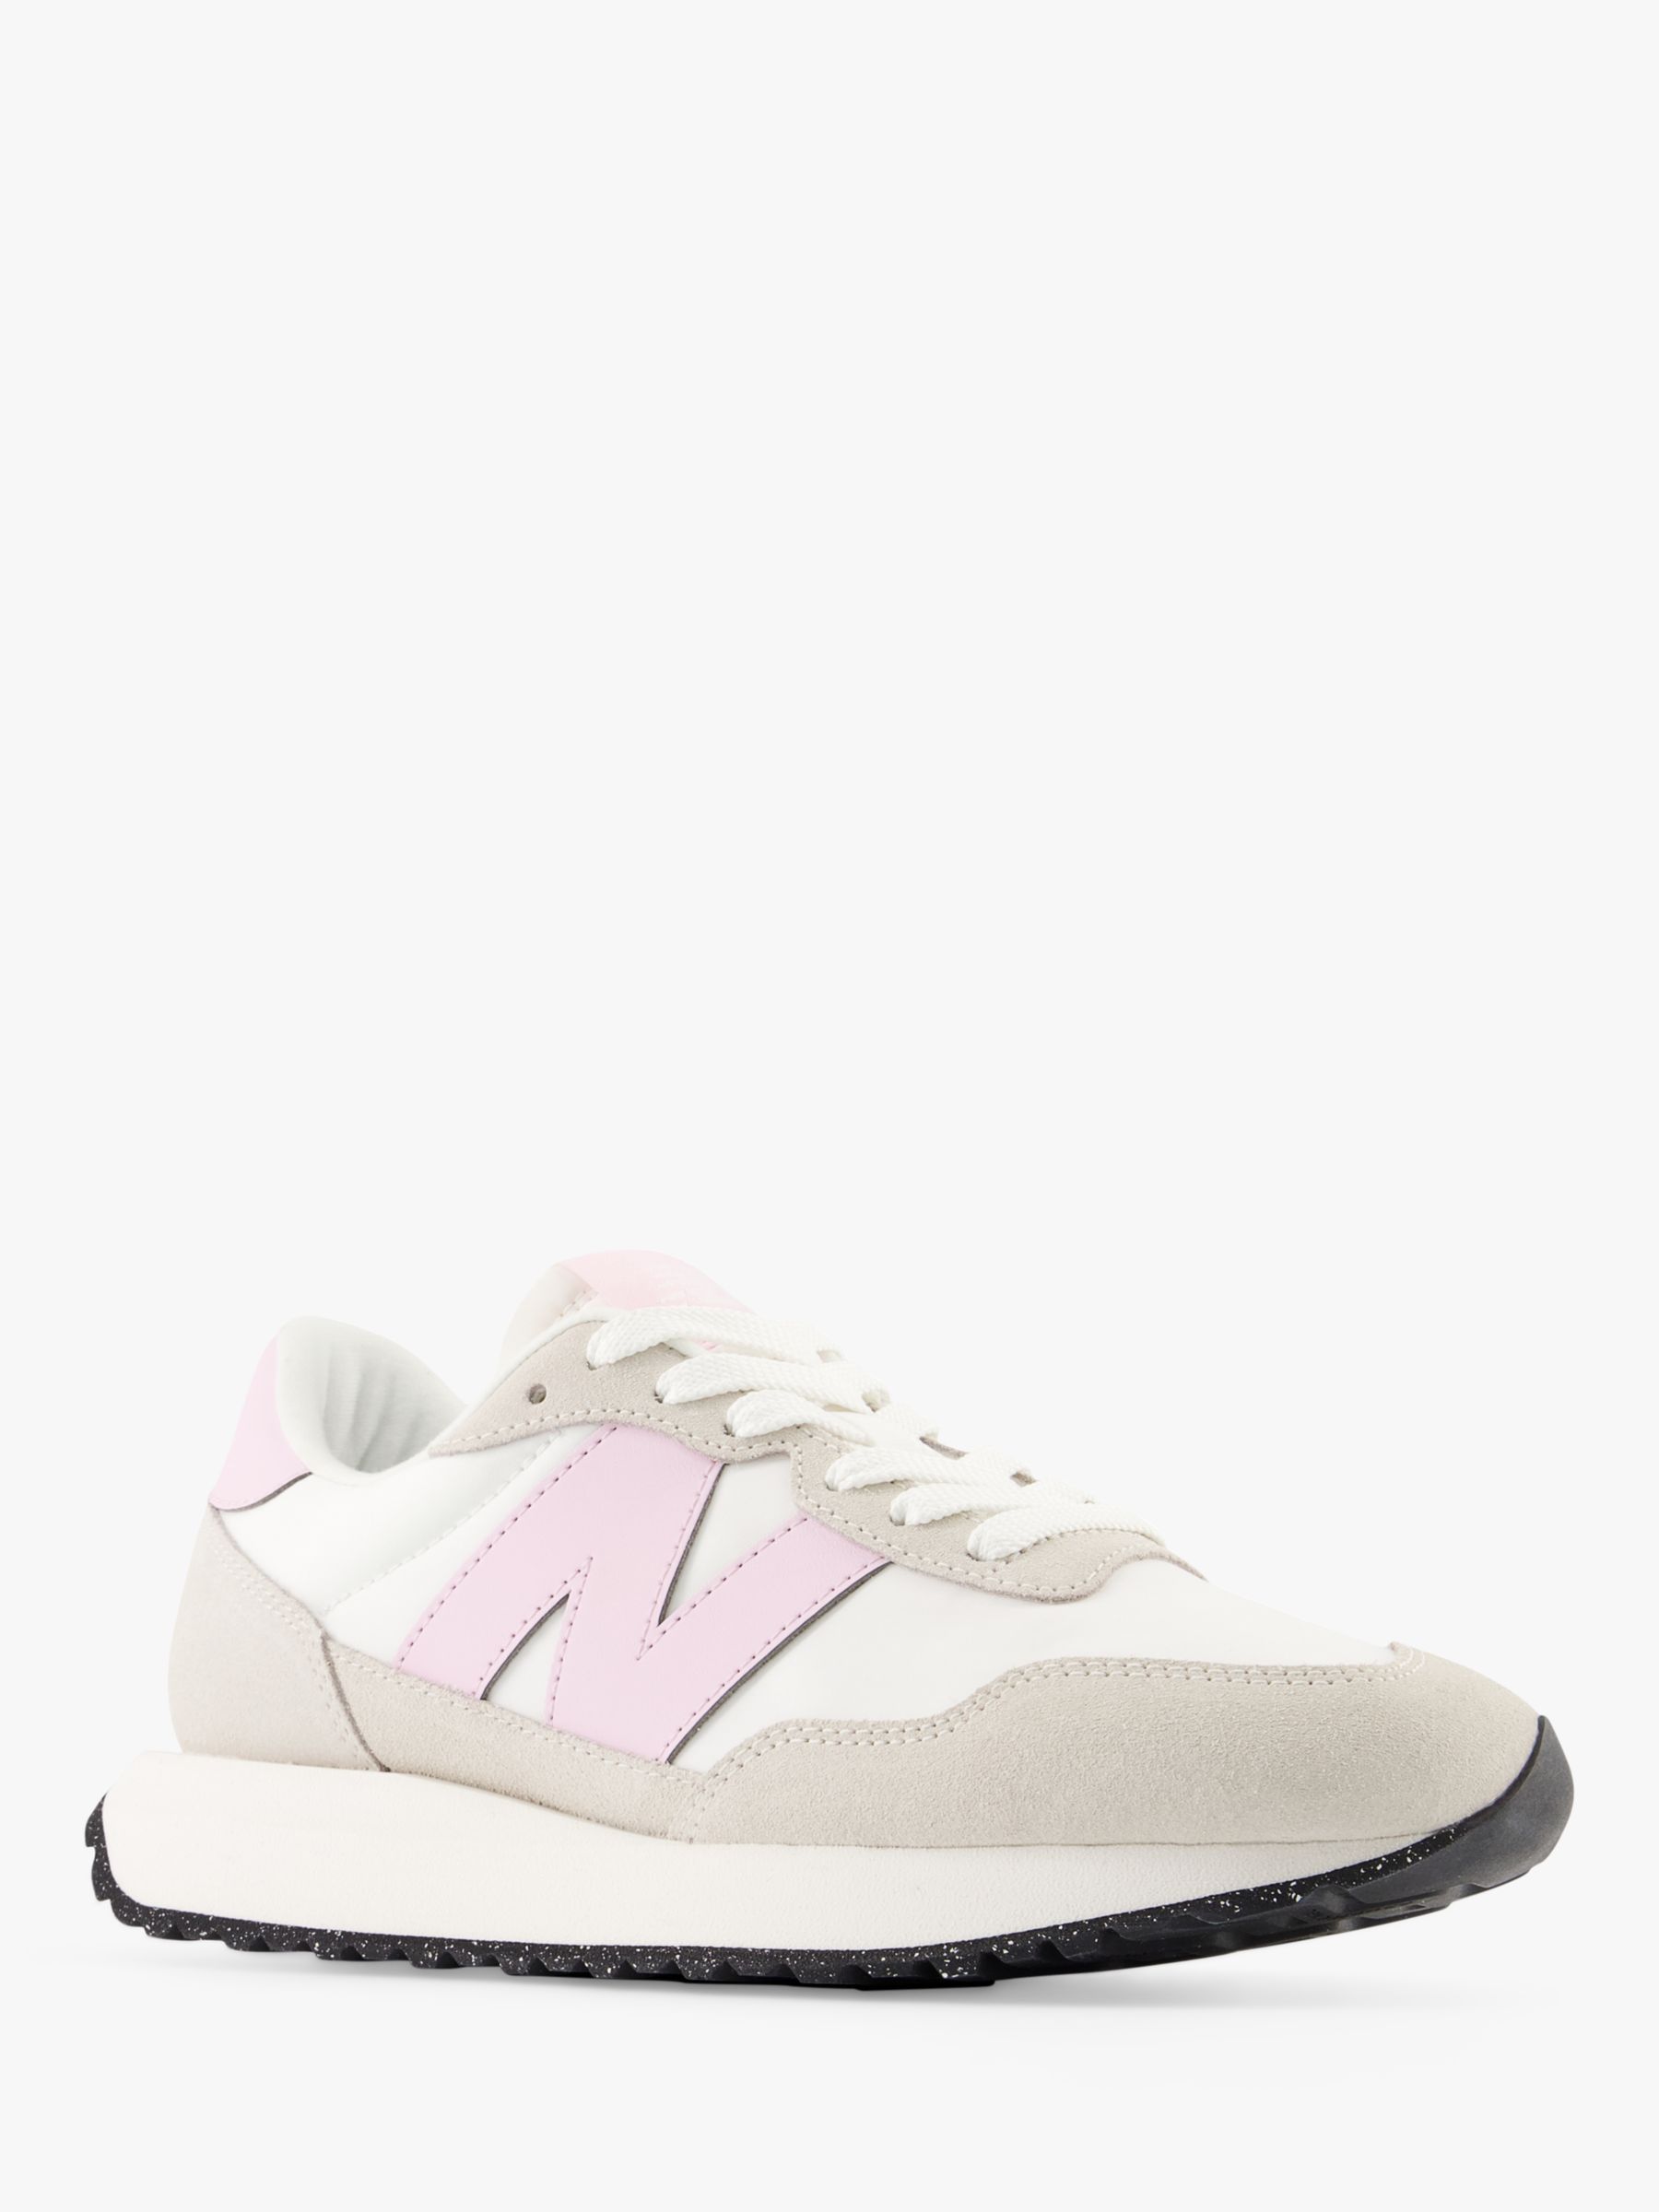 New Balance 237 Suede Mesh Trainers, White/Pink, 6